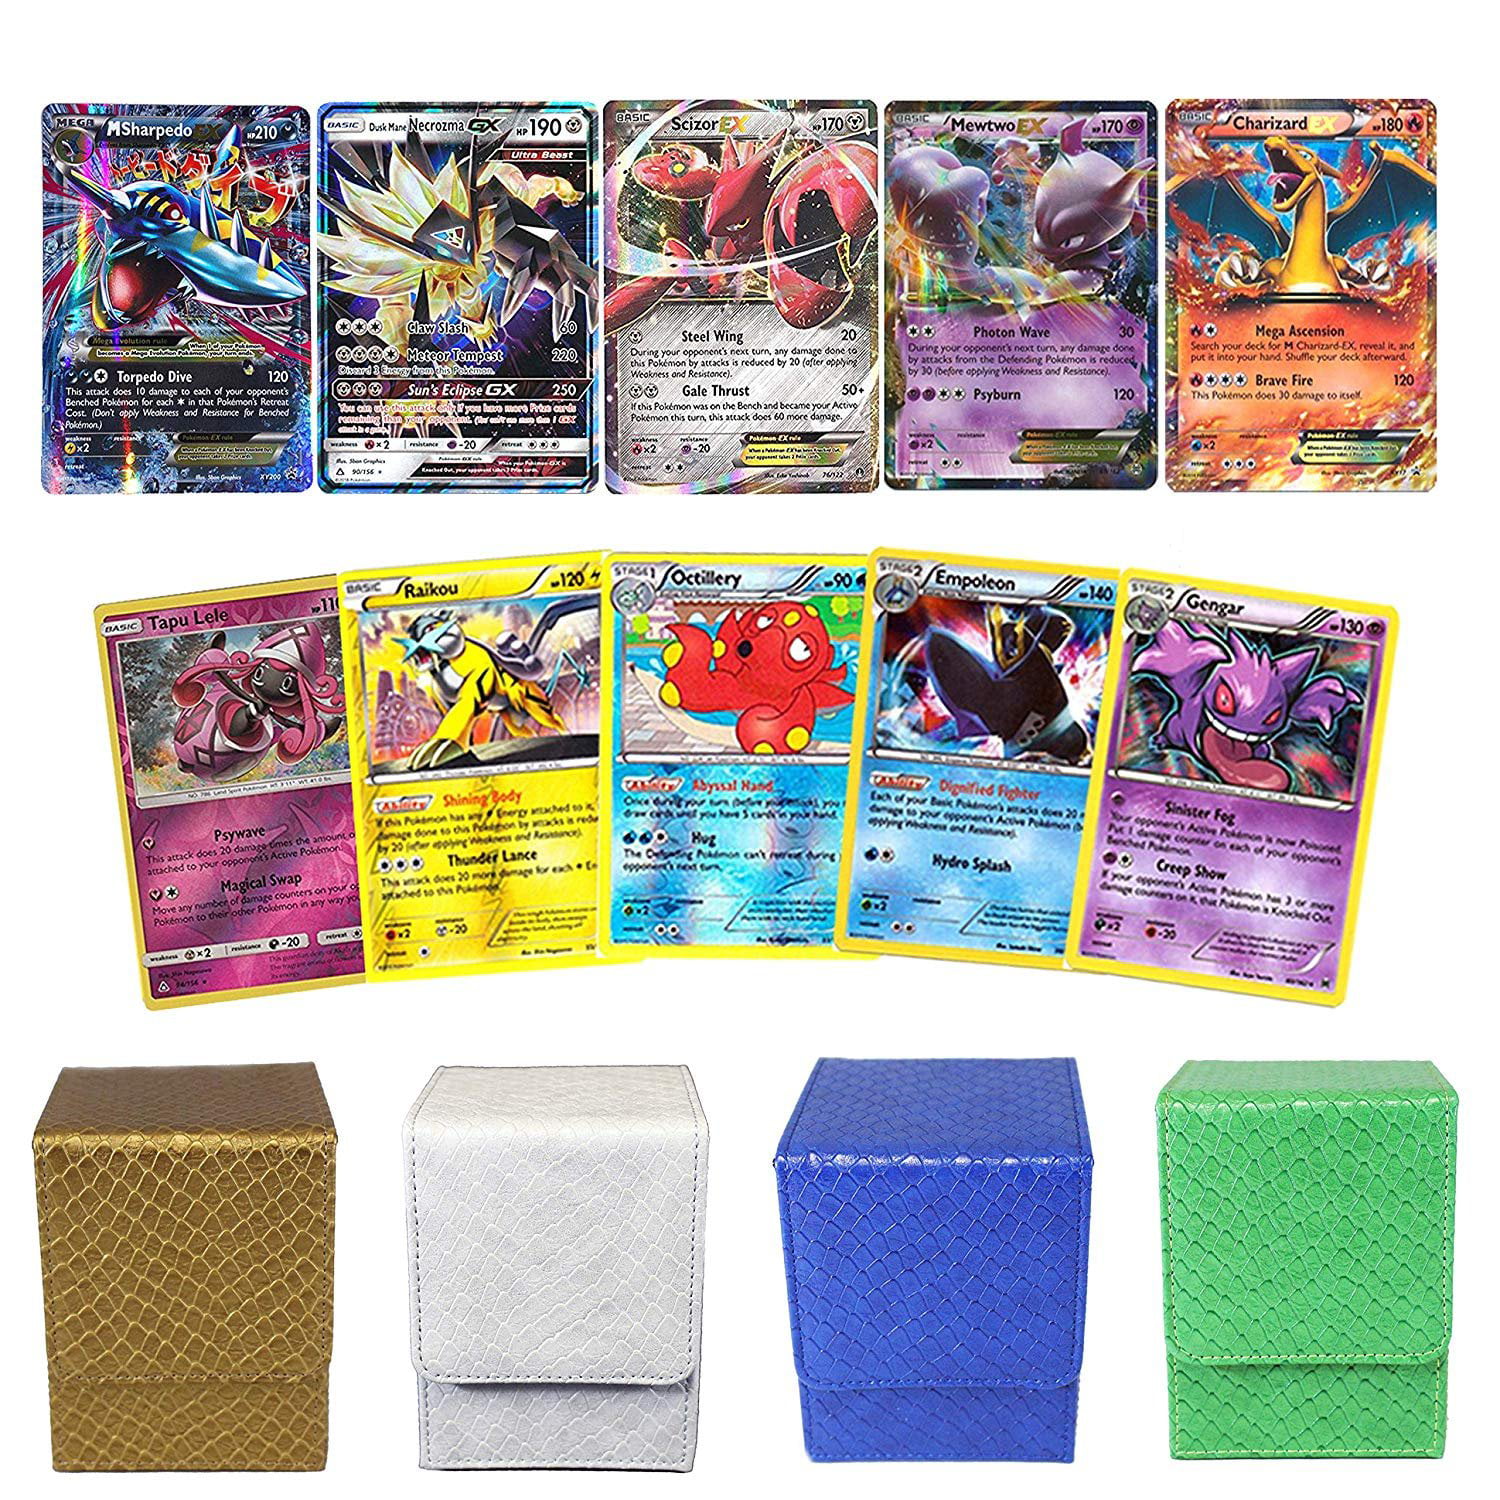 Gold, Blue, Green, or White Figure 1 Dragonhide Deck Box Playoly Pokemon Premium Collection 100 Cards with GX Mega EX Shining Holo 10 Rares 4 Booster Pack